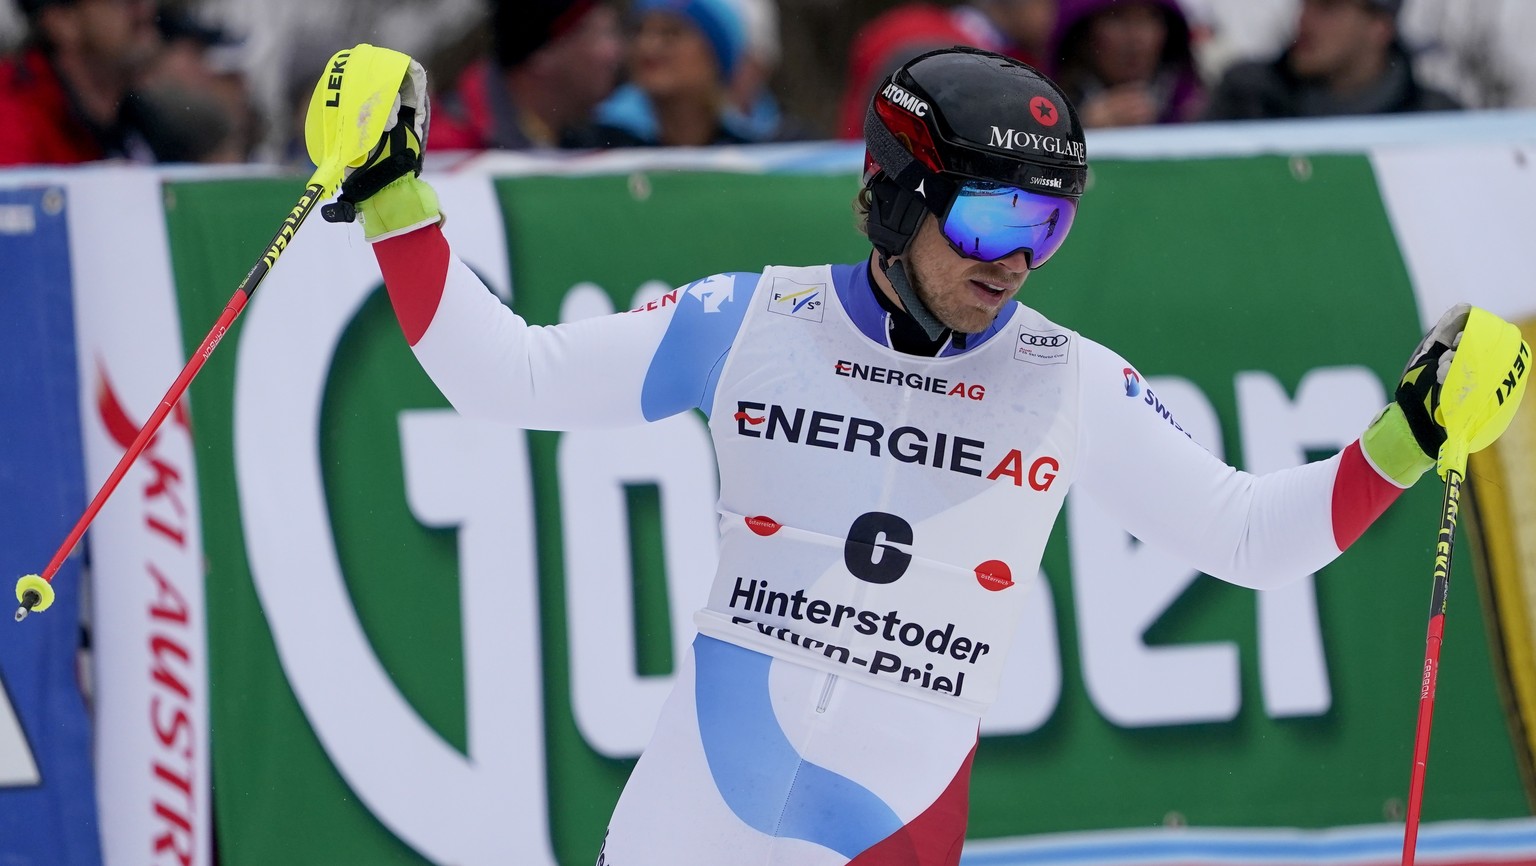 Switzerland&#039;s Mauro Caviezel gets to the finish area after completing an alpine ski, men&#039;s World Cup combined, in Hinterstoder, Austria, Sunday, March 1, 2020. (AP Photo/Giovanni Auletta)